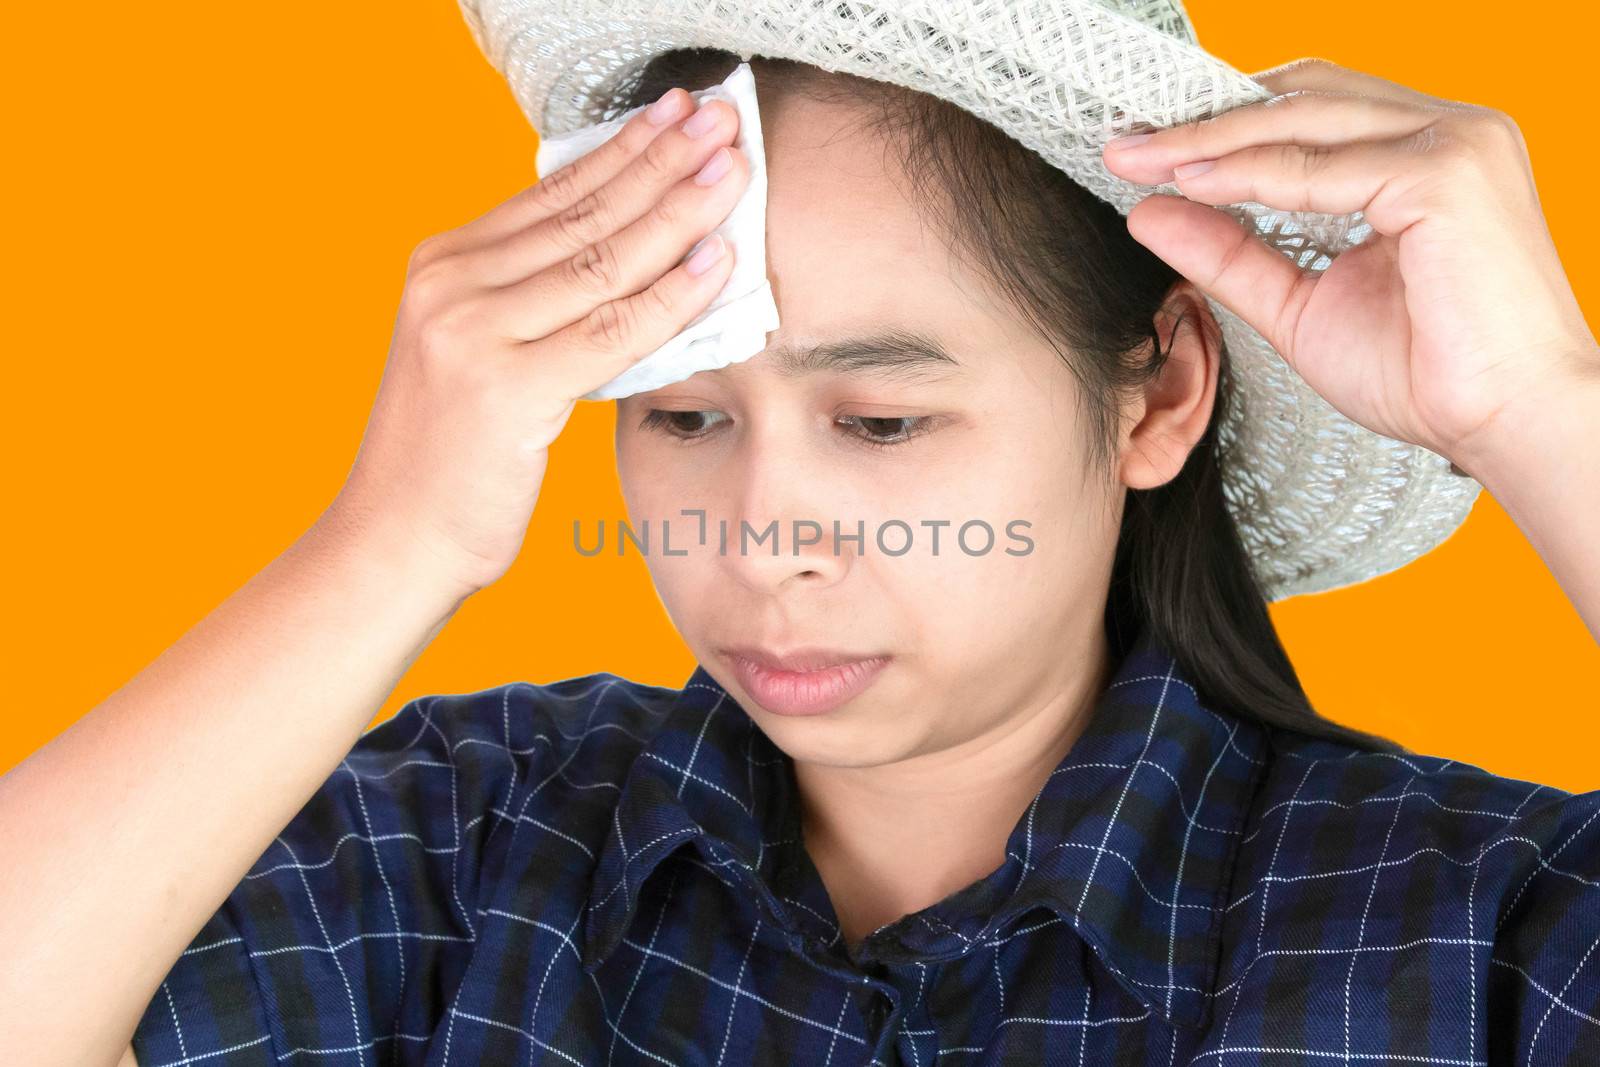 Asian young woman uses a tissue to wiped the sweat on her forehead on a hot day. by TEERASAK